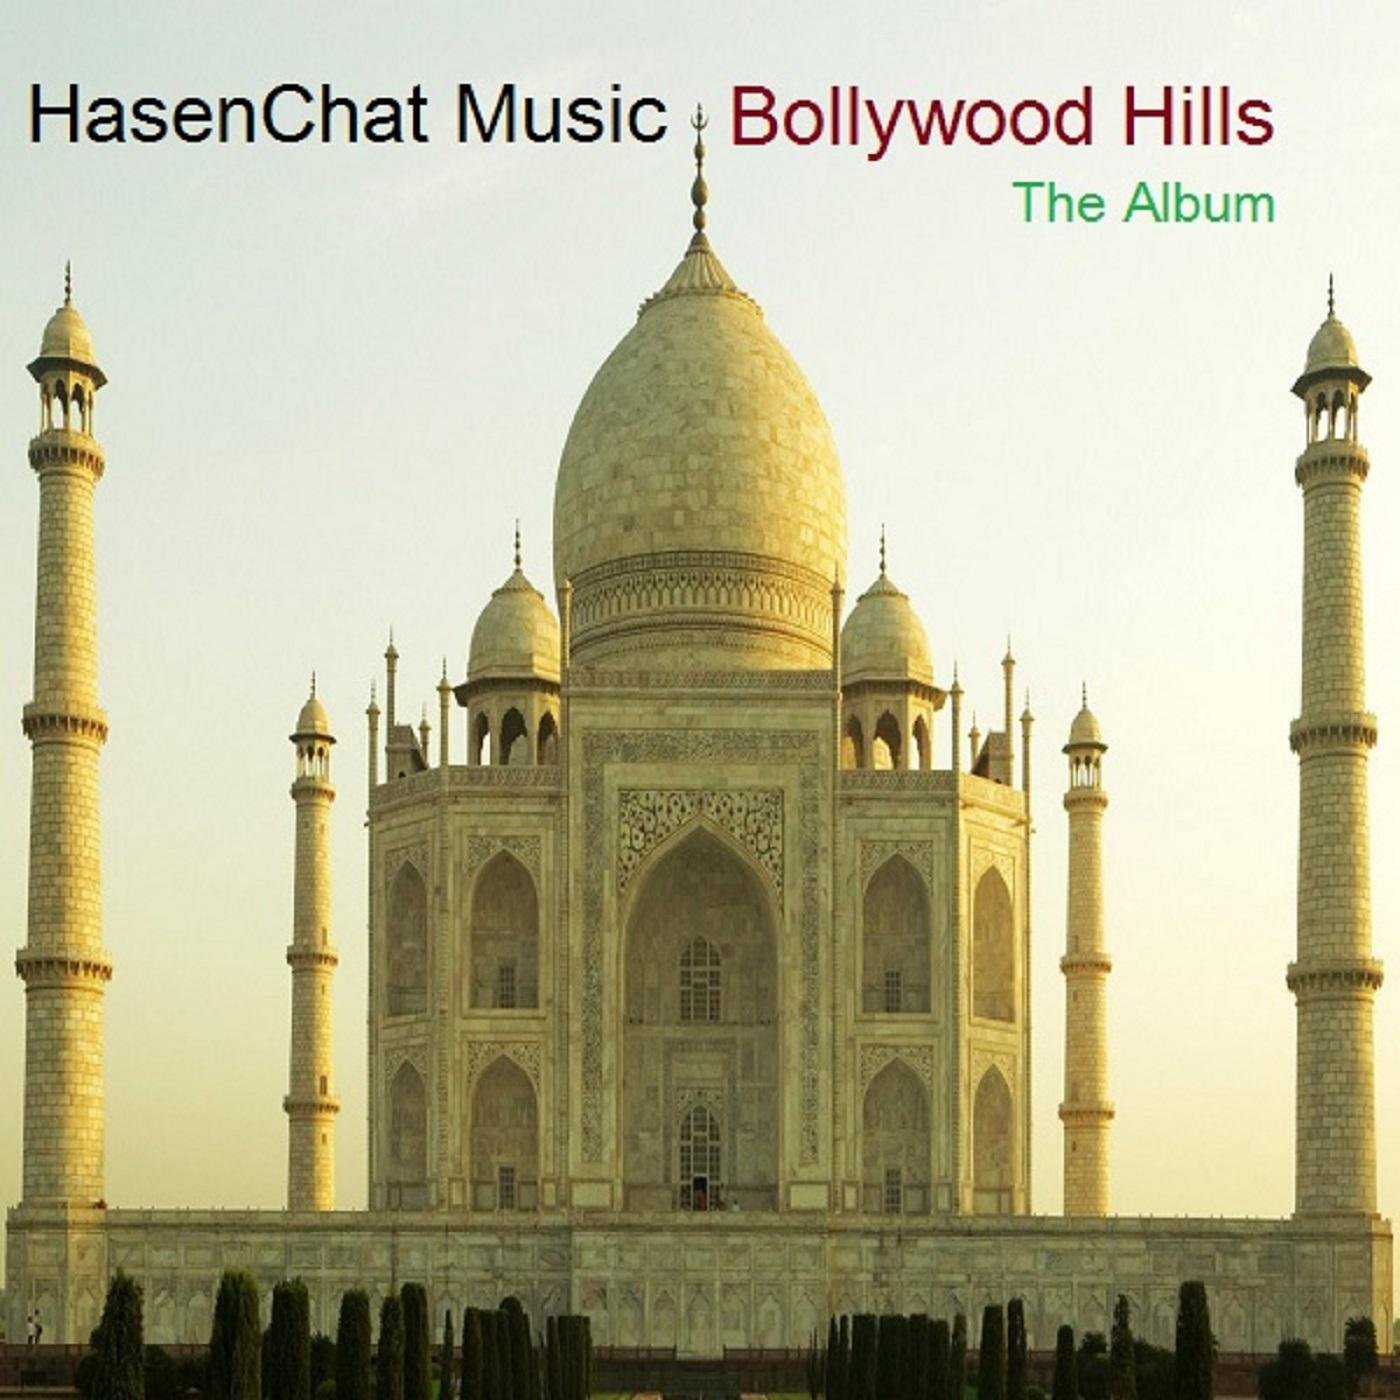 This is the Twitter Account for the Bollywood and India Music Part of HasenChat Music